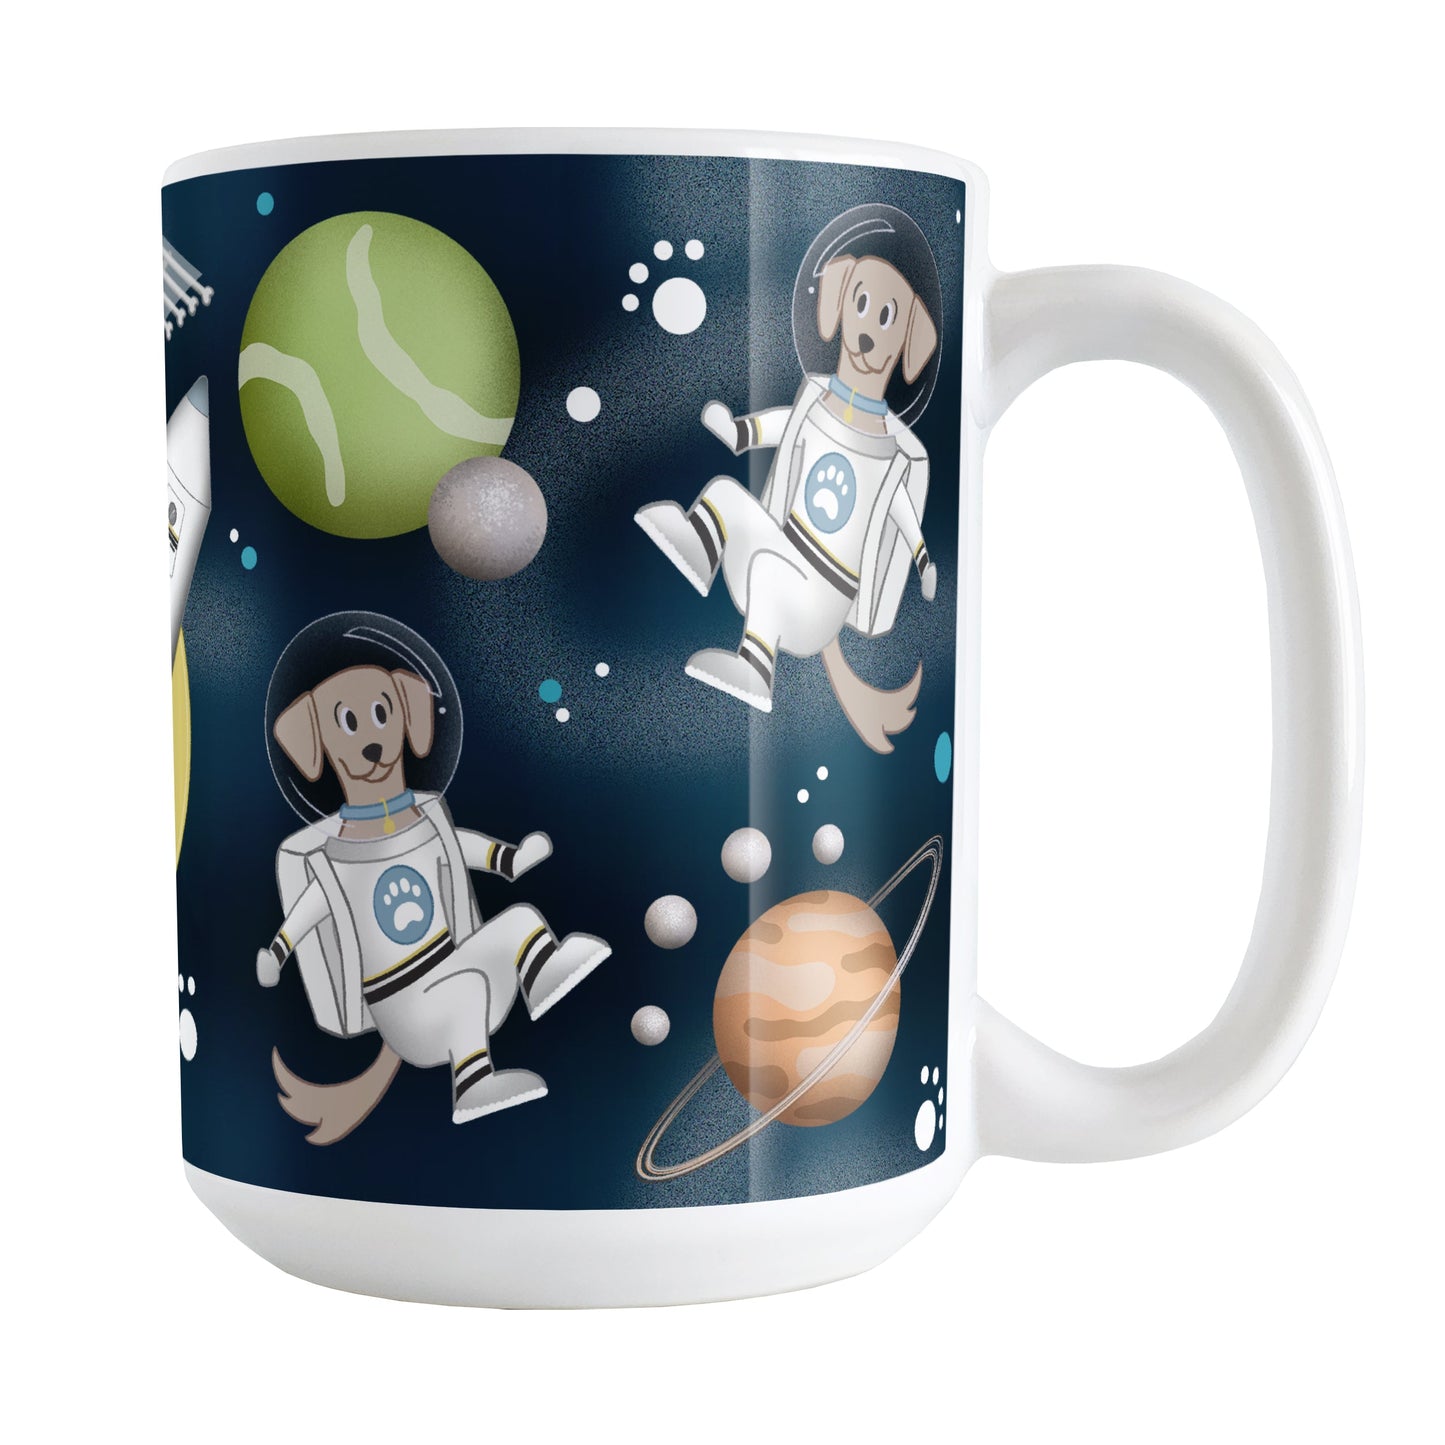 Galaxy Dog-stronaut Mug (15oz) at Amy's Coffee Mugs. A ceramic coffee mug with a fun galaxy "dog-stronaut" design with dog astronauts, dog themed planets, a dog bone satellite, paw print stars, and a dog branded rocket ship on an outer-space background. Perfect for people who love galaxy and space designs, and love dogs too!